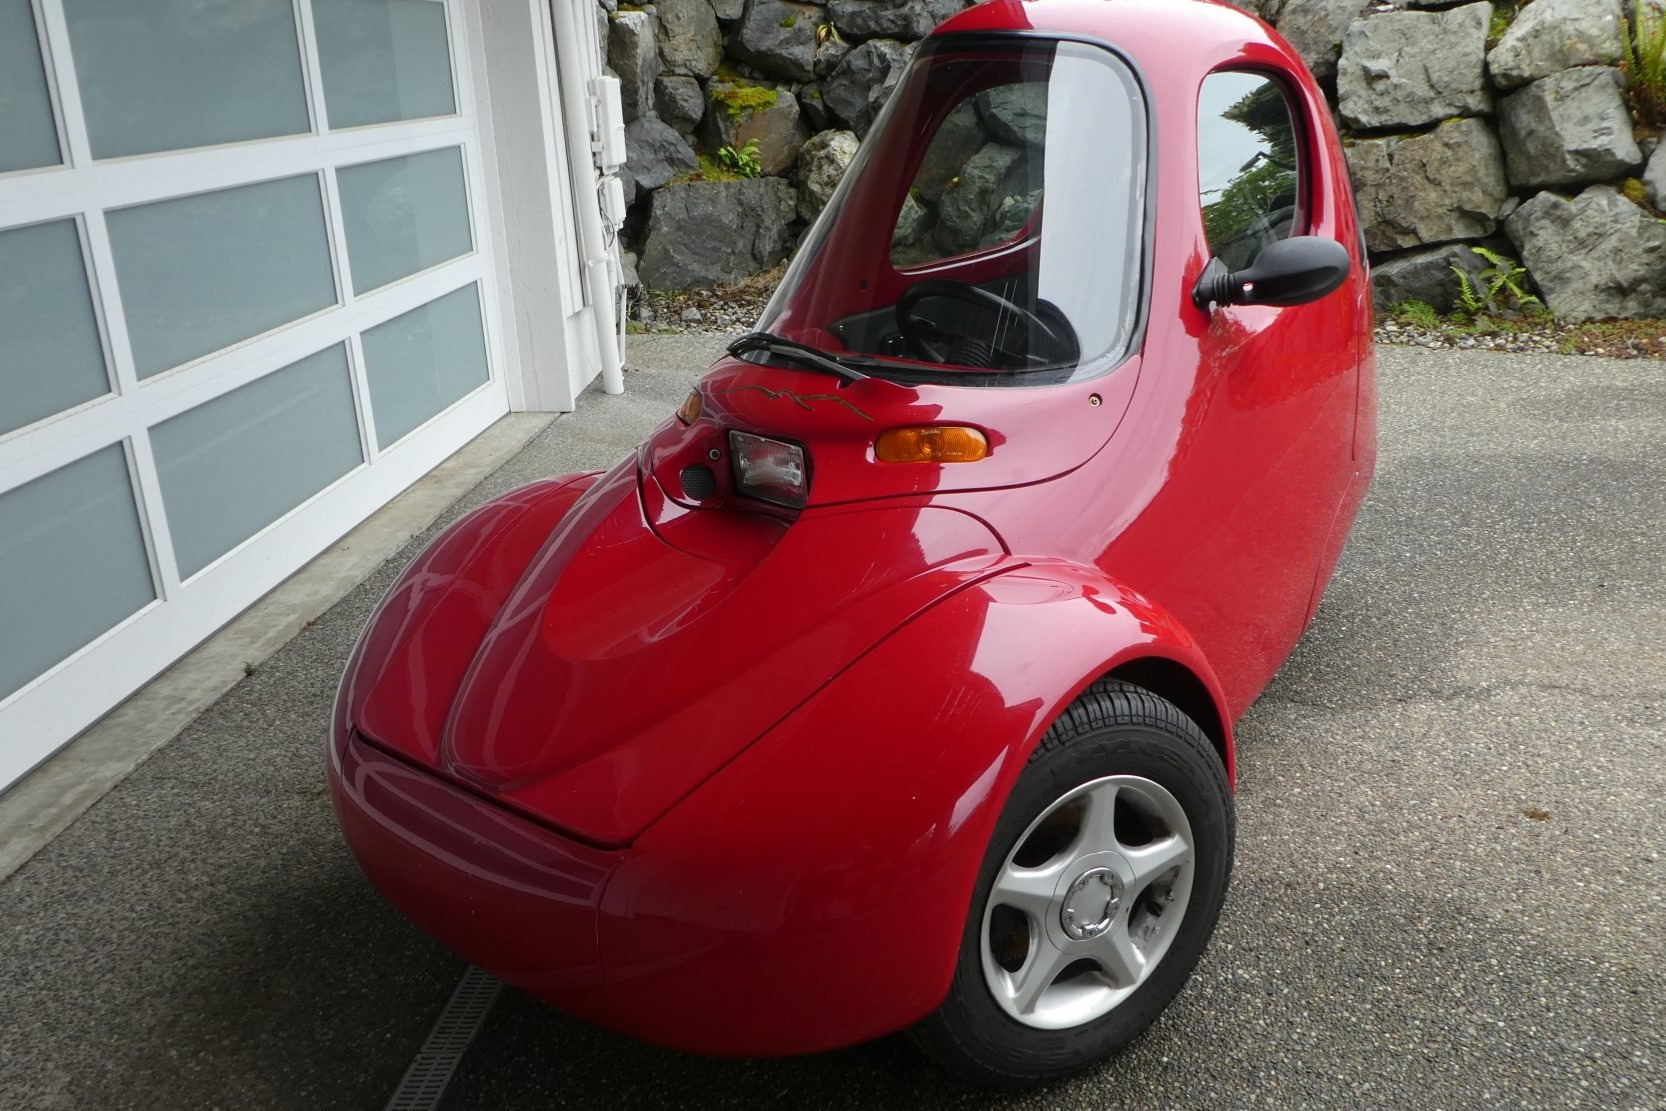 Used 2000 Corbin Sparrow EV Project Review